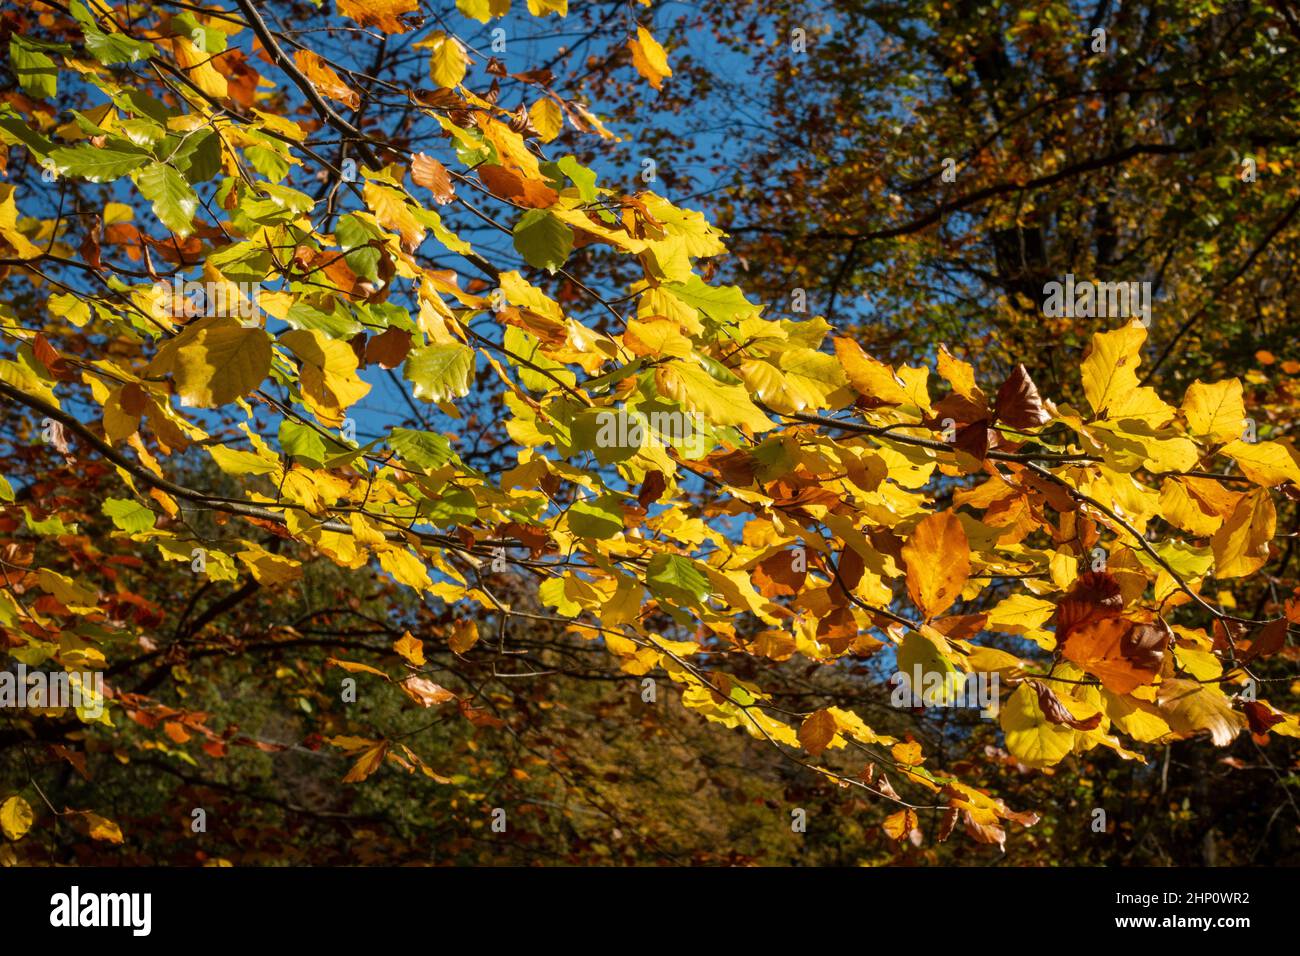 View towards the sky through the autumn canopy of a large tree. Stock Photo